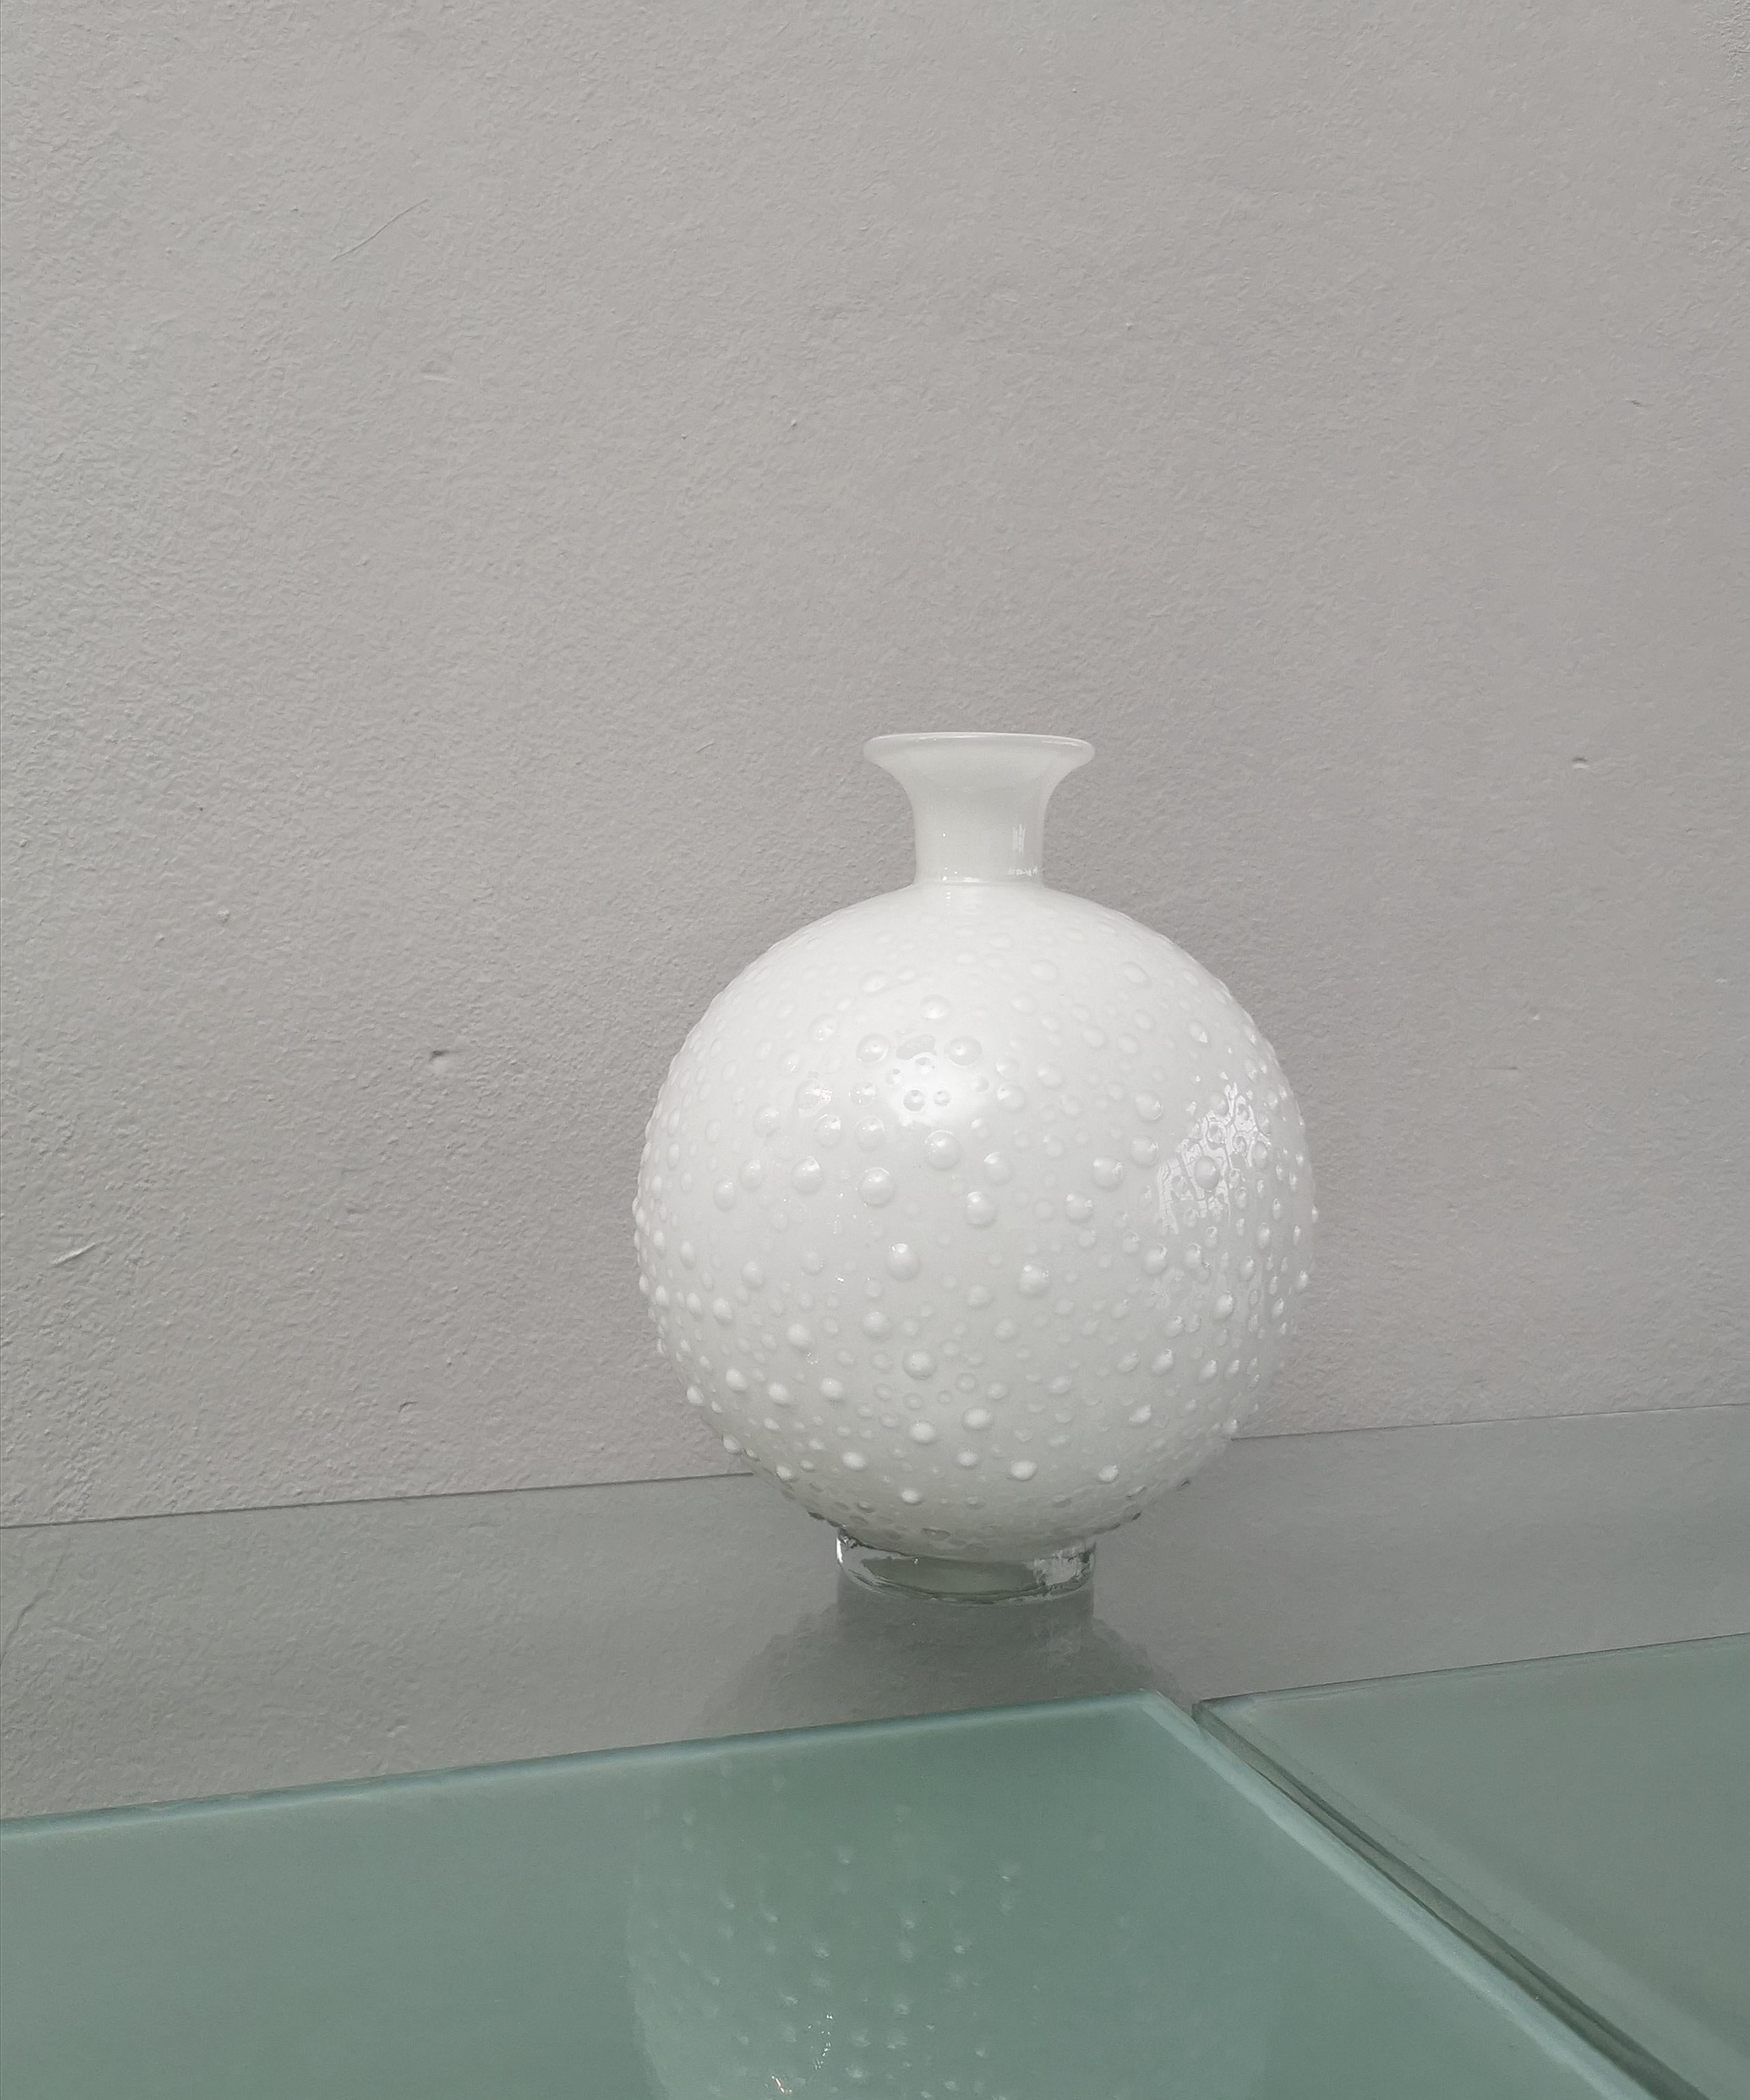 Simpatic vase made in Italy in the 80s.
The spherical vase with a narrow neck was made of white Murano glass with small bubbles that cross the entire surface.



Note: We try to offer our customers an excellent service even in shipments all over the